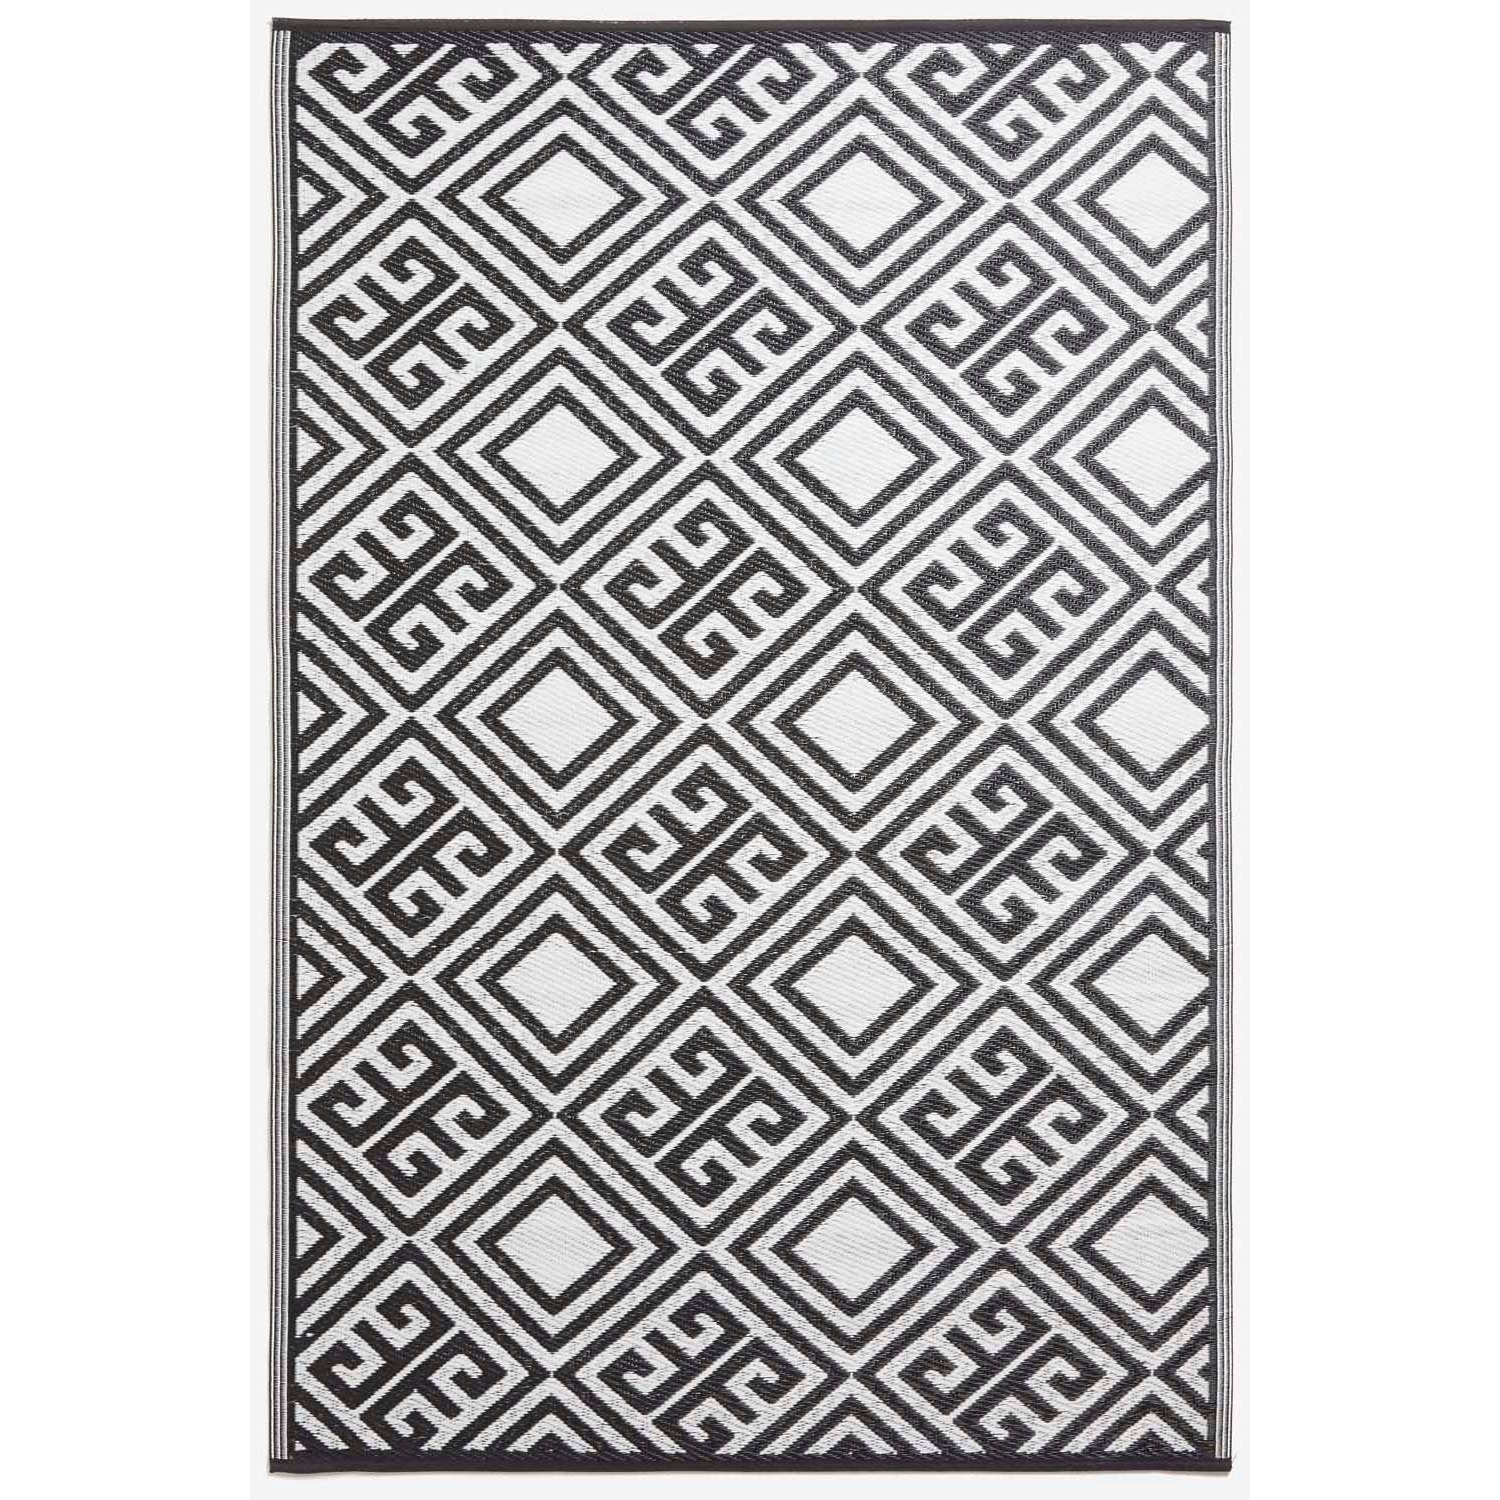 Black and White Geometric Design Reversible Outdoor Rug - image 1